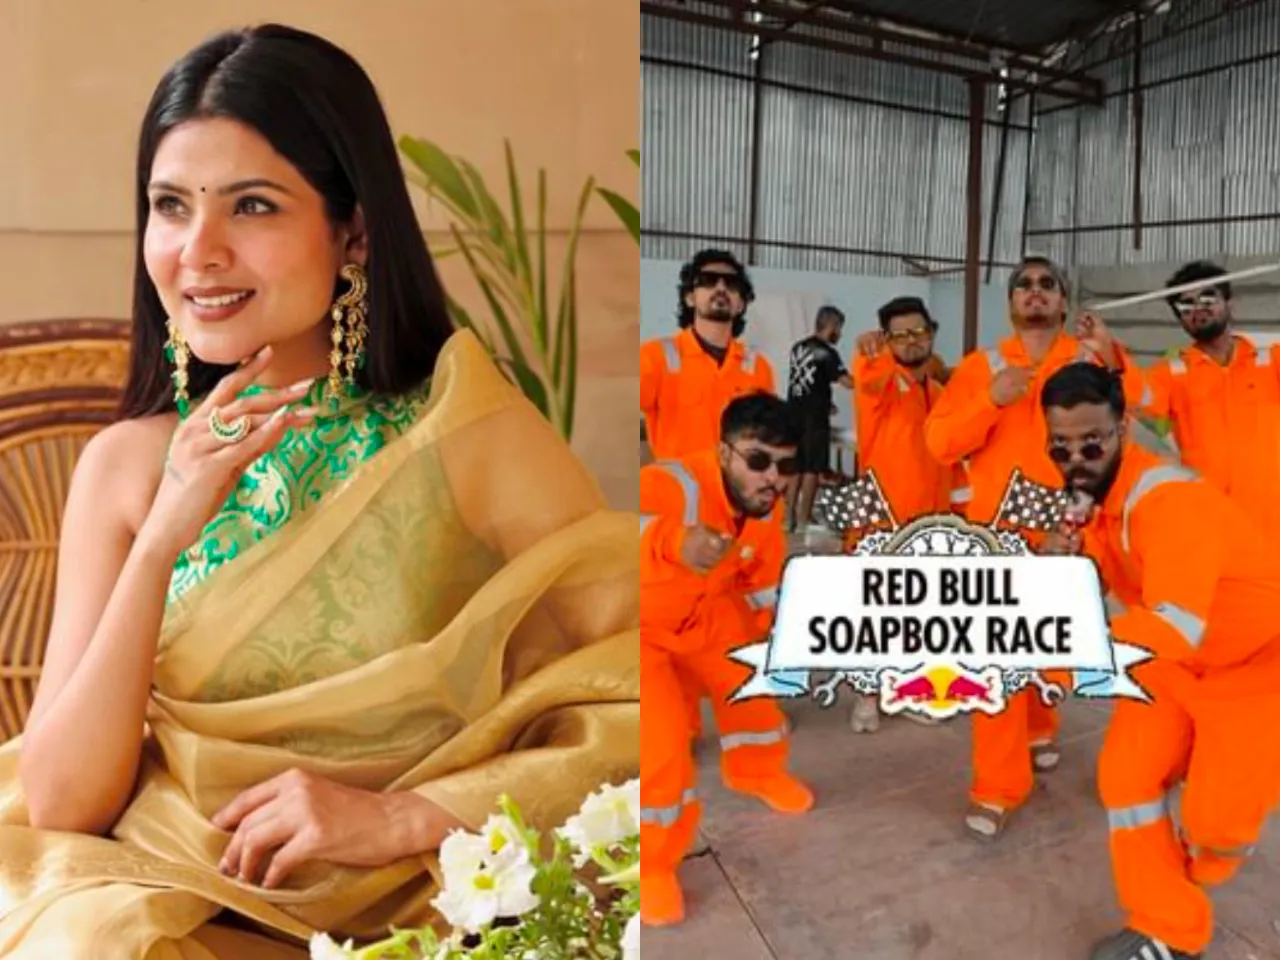 From Niharika Jain’s Jewellery Brand to highlights from the Red Bull Soapbox Race, this weekly roundup feels like a exciting ride